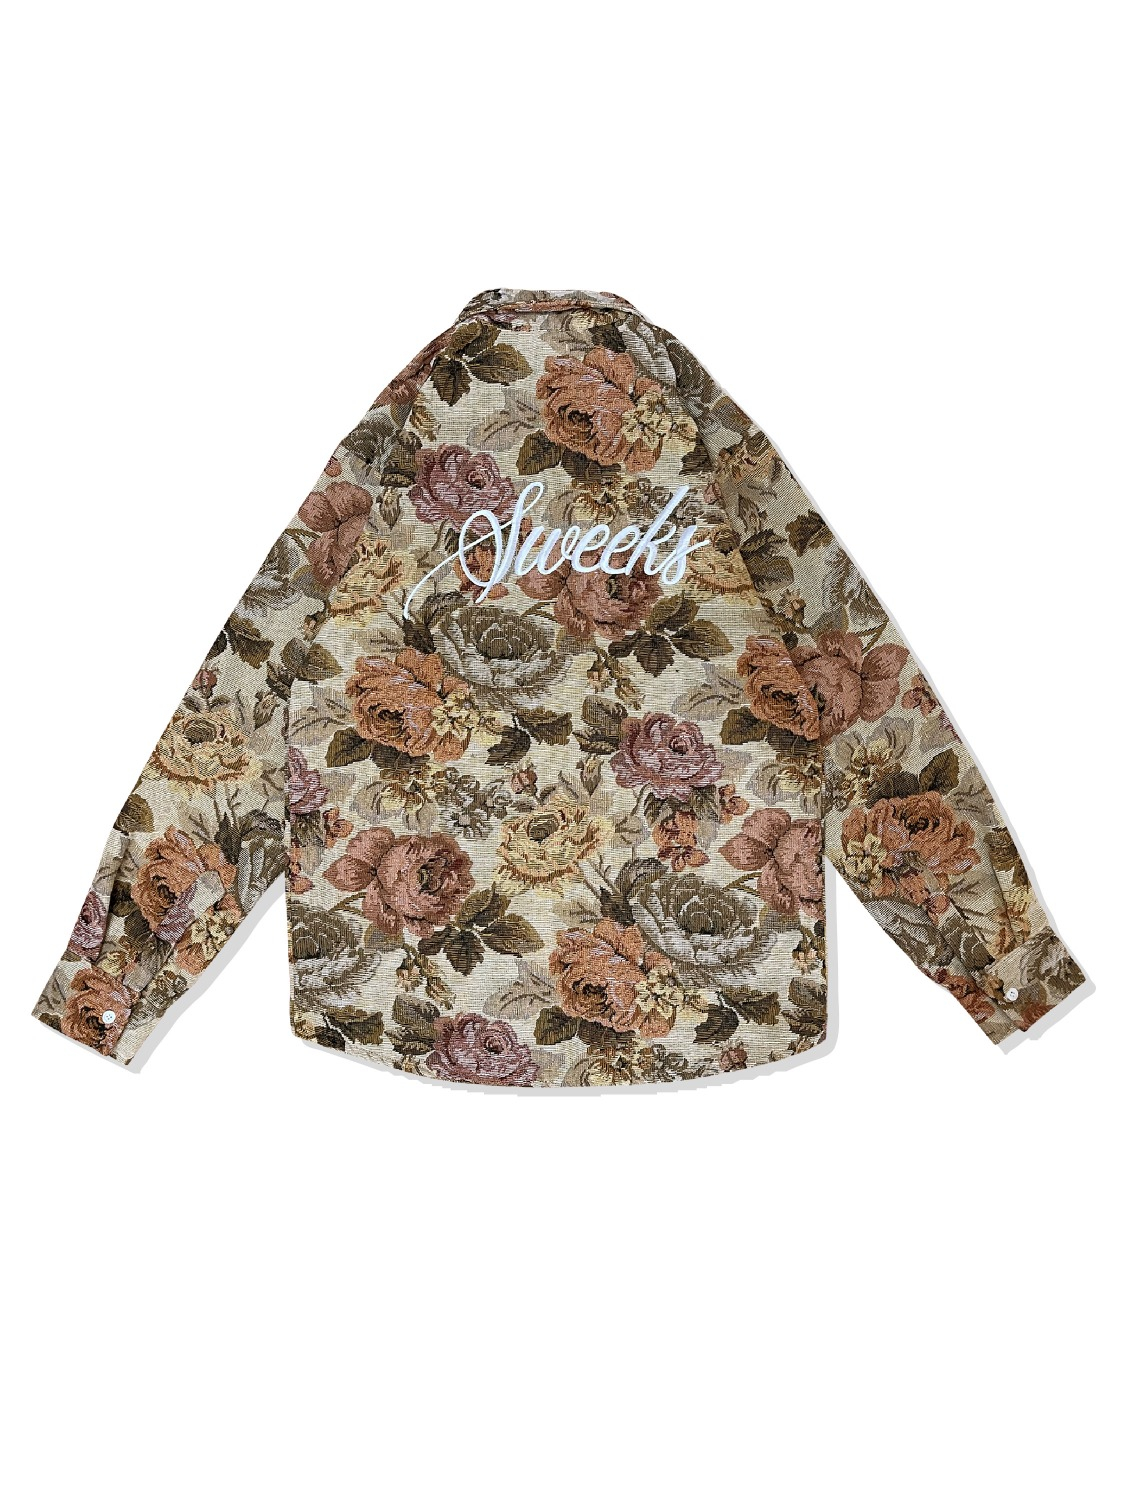 SW Floral Shirt (Day)